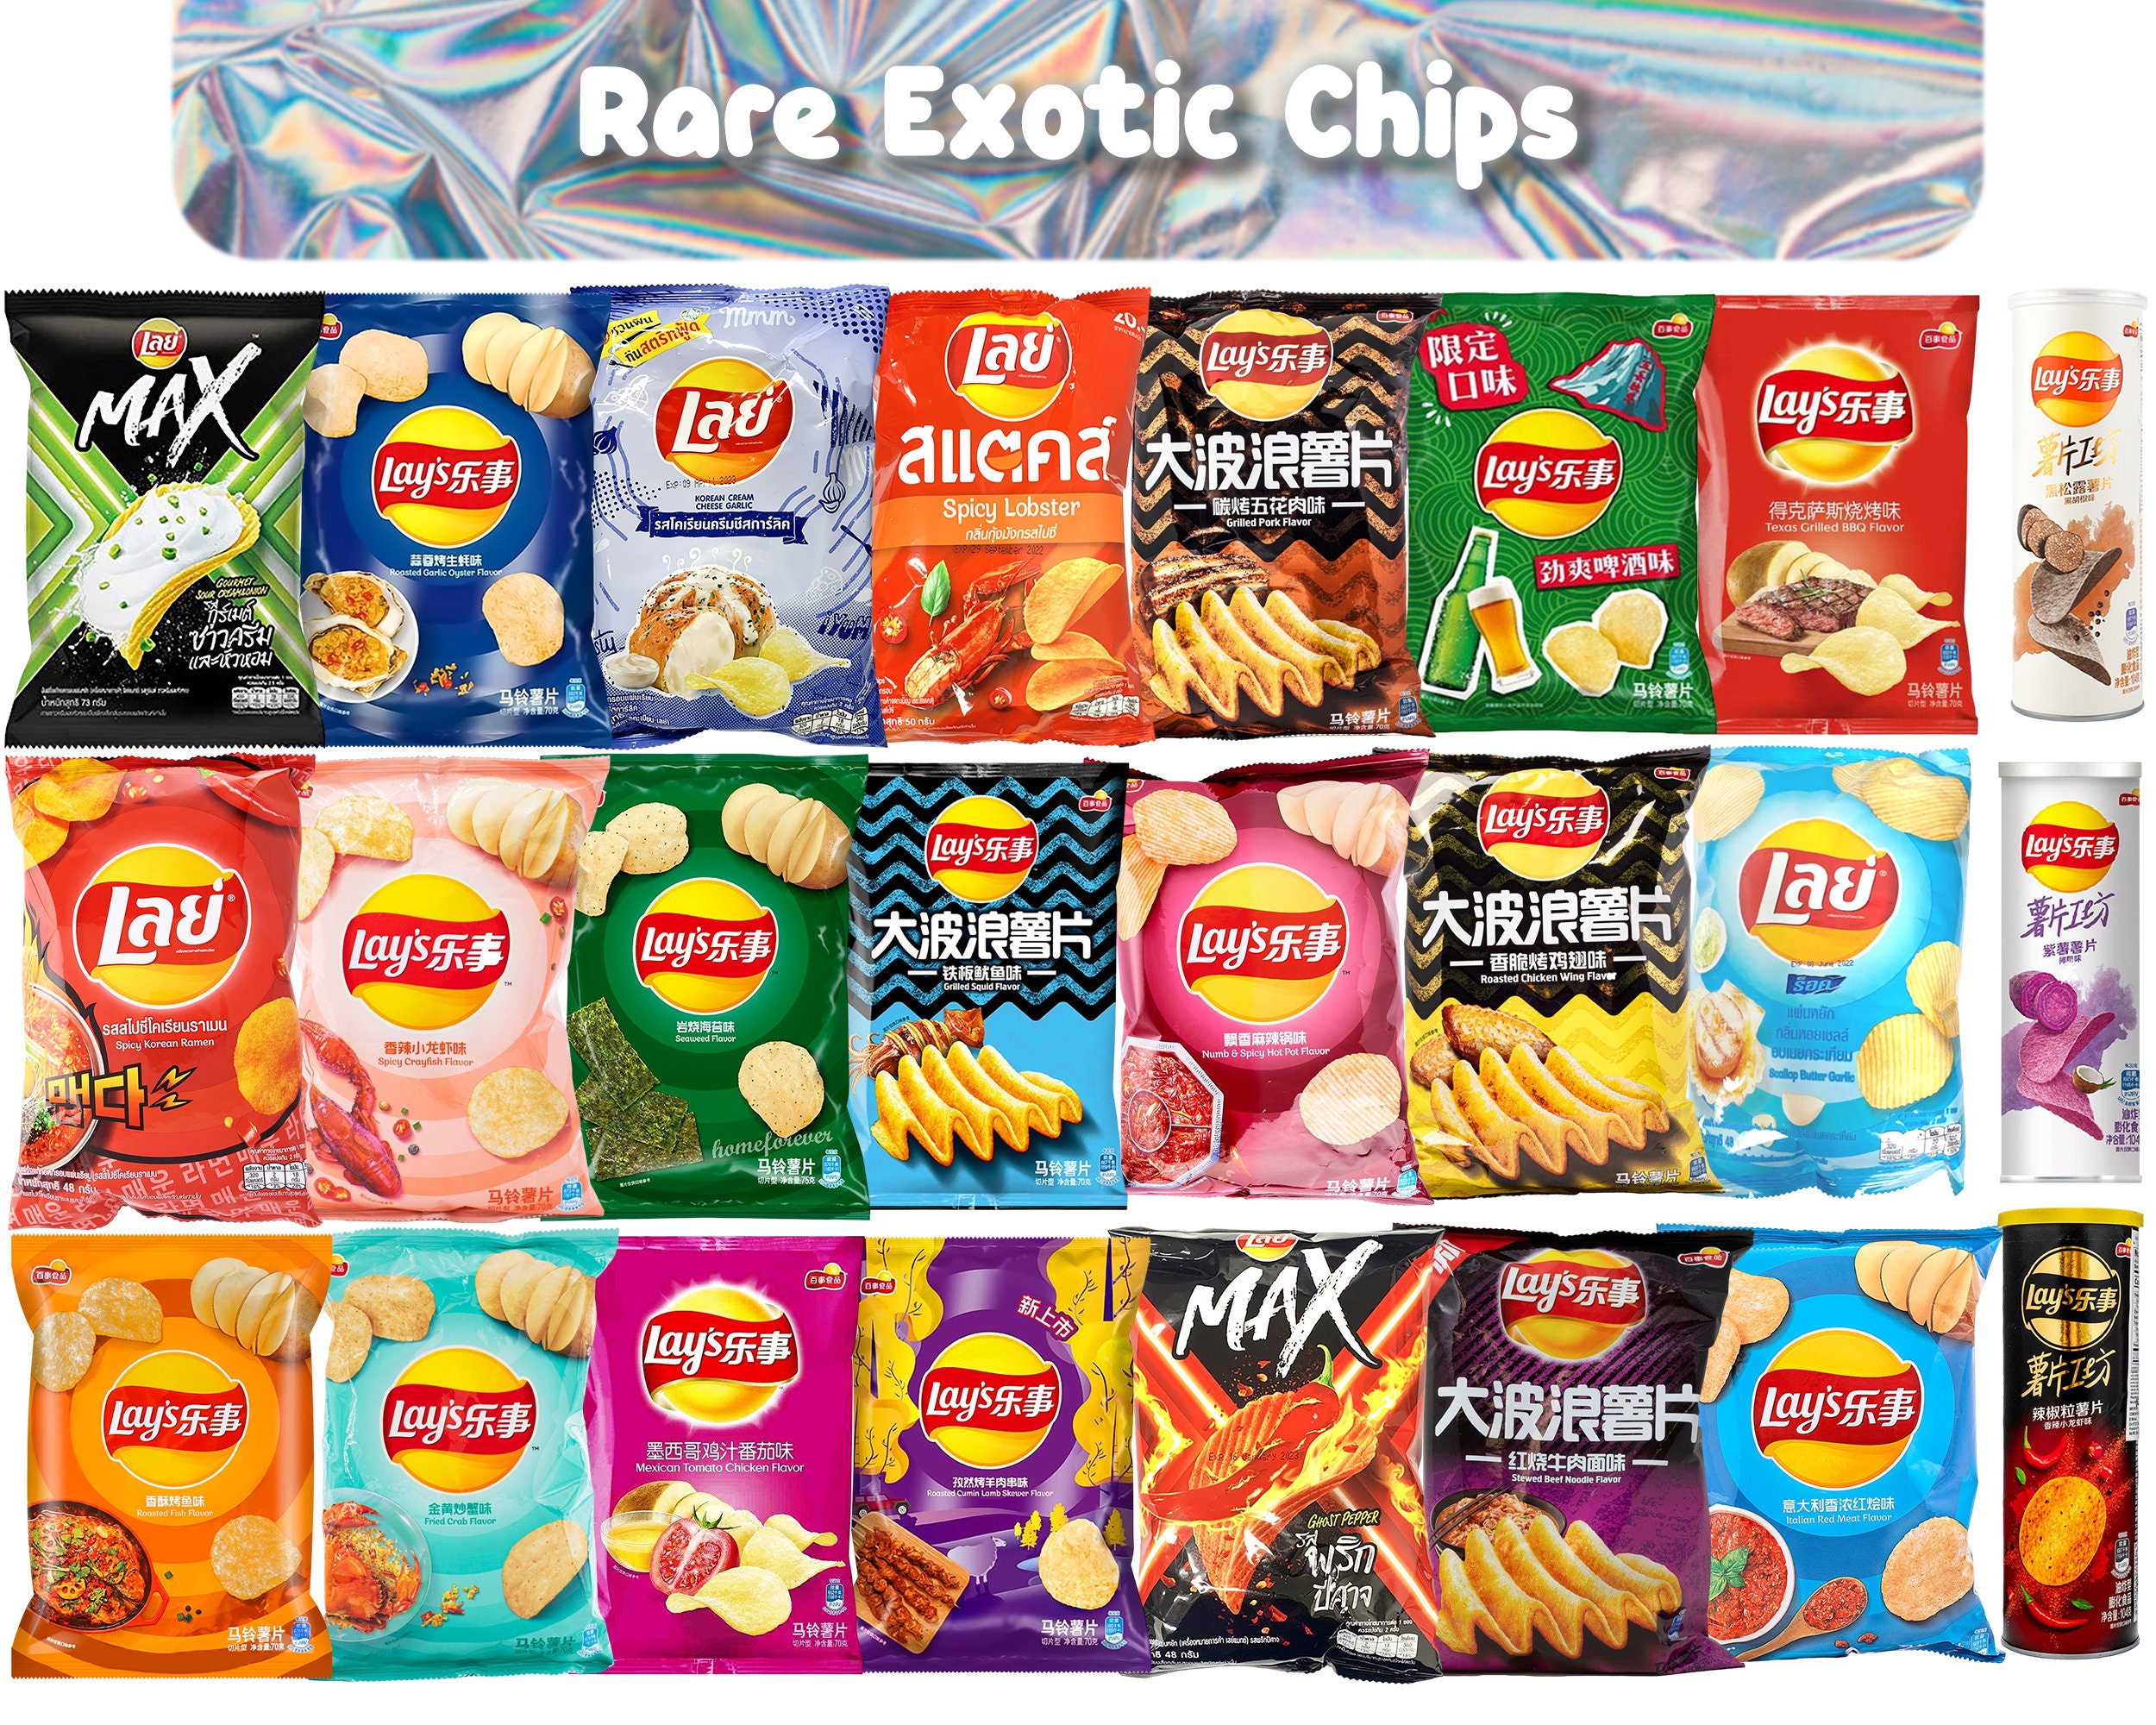 Rare Lays Cheetos Doritos Limited Editions Exotic Special Asian Flavors 80  Options Taiwan Chinese Japanese Thai Asian Snack 